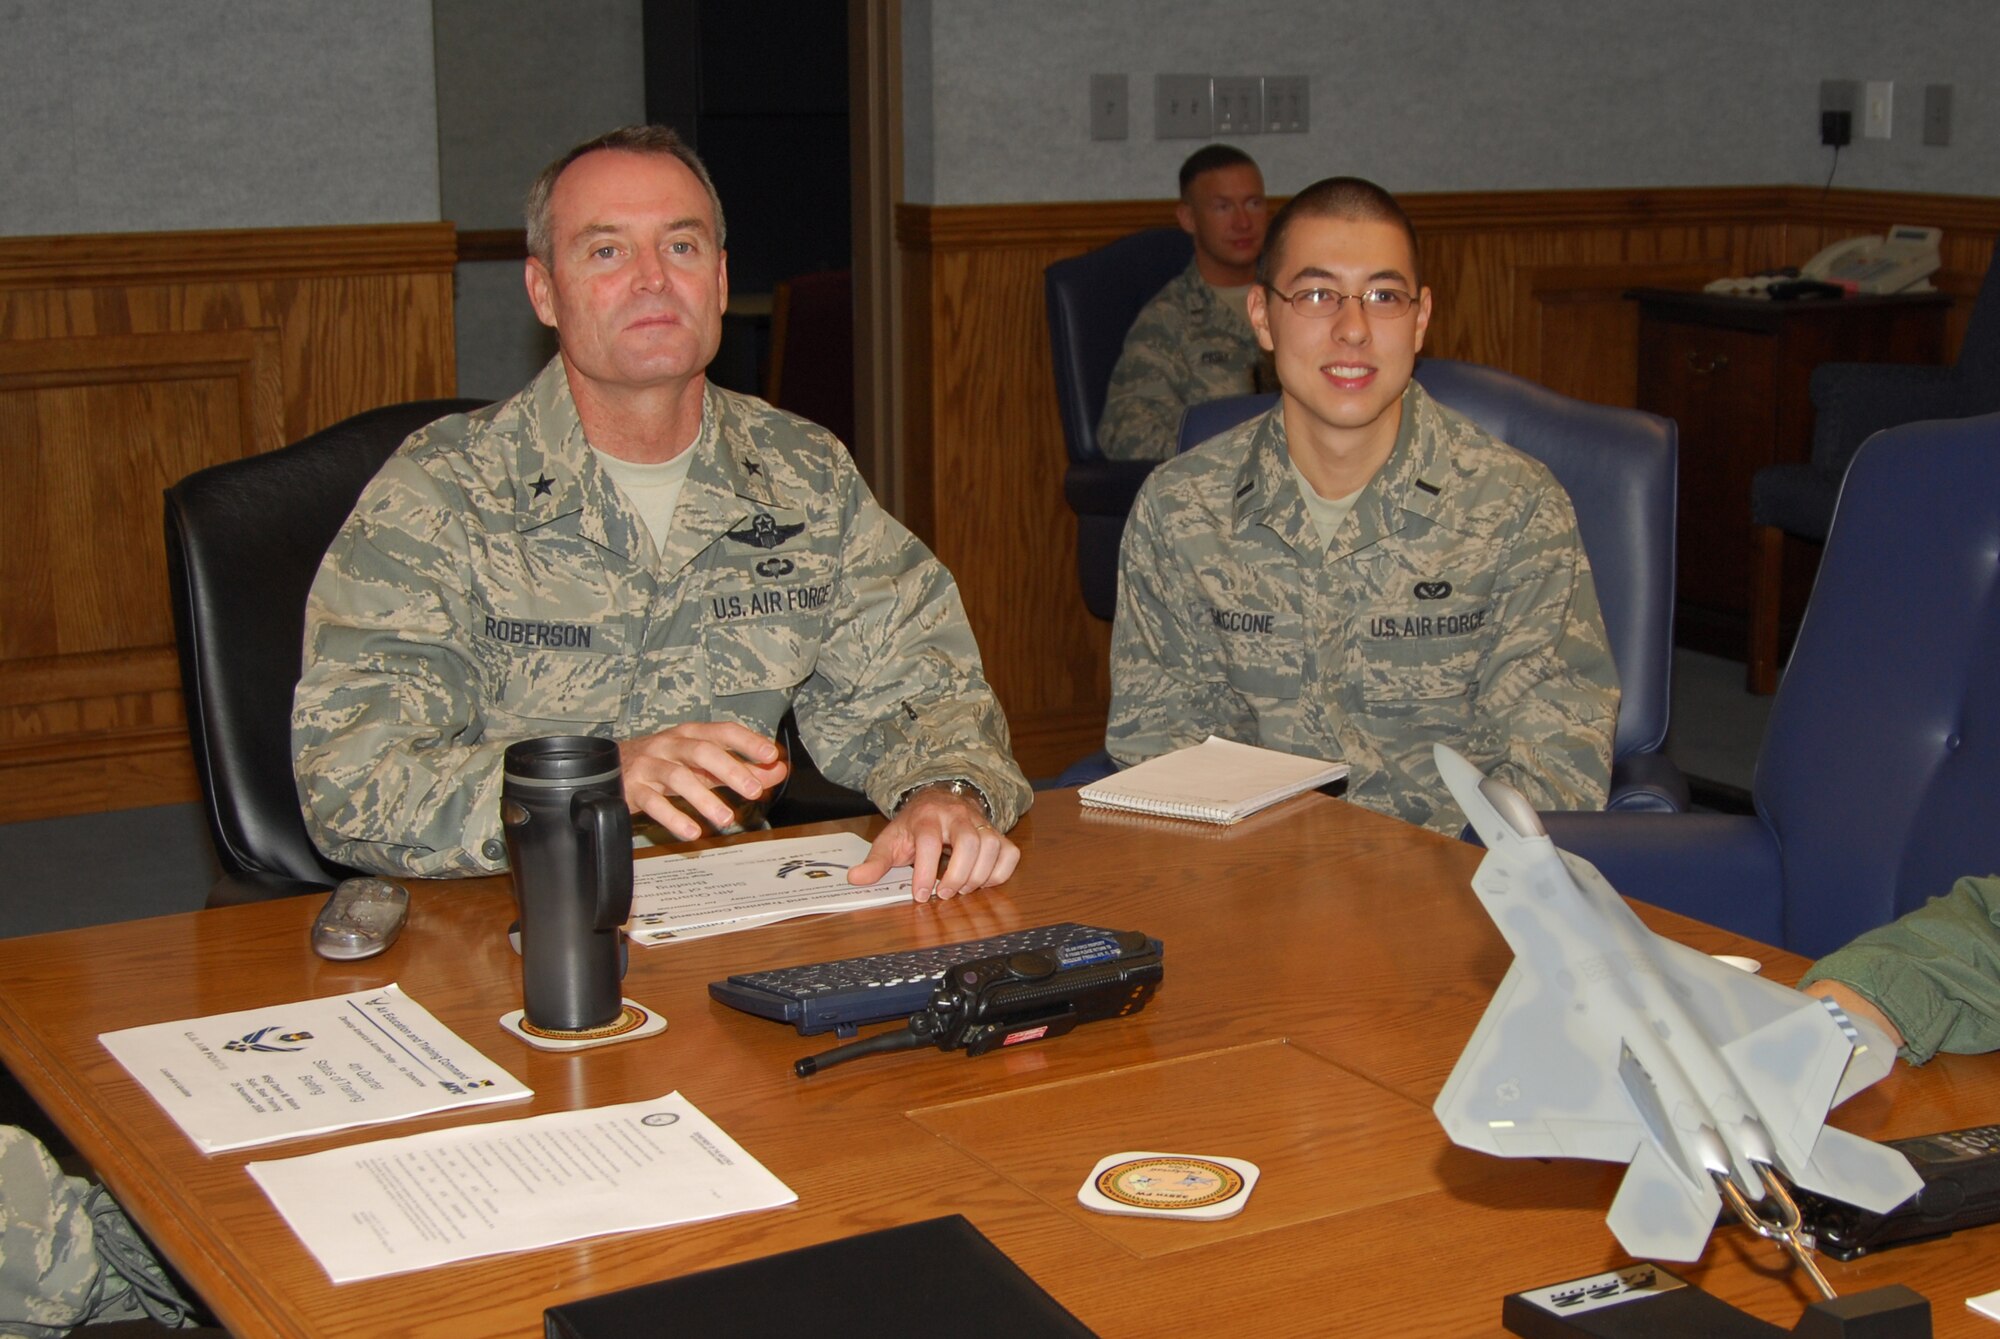 1st Lt. Nick Saccone, 325th Mission Support Group executive officer, shadows Brig. Gen. Darryl Roberson, 325th Fighter Wing commander, during the commander’s staff meeting here today.  Lieutenant Saccone reviews, critiques, edits, routes and tracks correspondence reports and decorations ensuring quality and timeliness.  He is also the MSG representative on organizational planning committees and tracks all group suspense to Wing and Headquarters.  Lieutenant Saccone spent the day with General Roberson as part of the Commander’s Shadow Program.  He has served more than two years in the military and is a native of Pittsburgh, Pa.  (U.S. Air Force photo by Lisa Norman) 